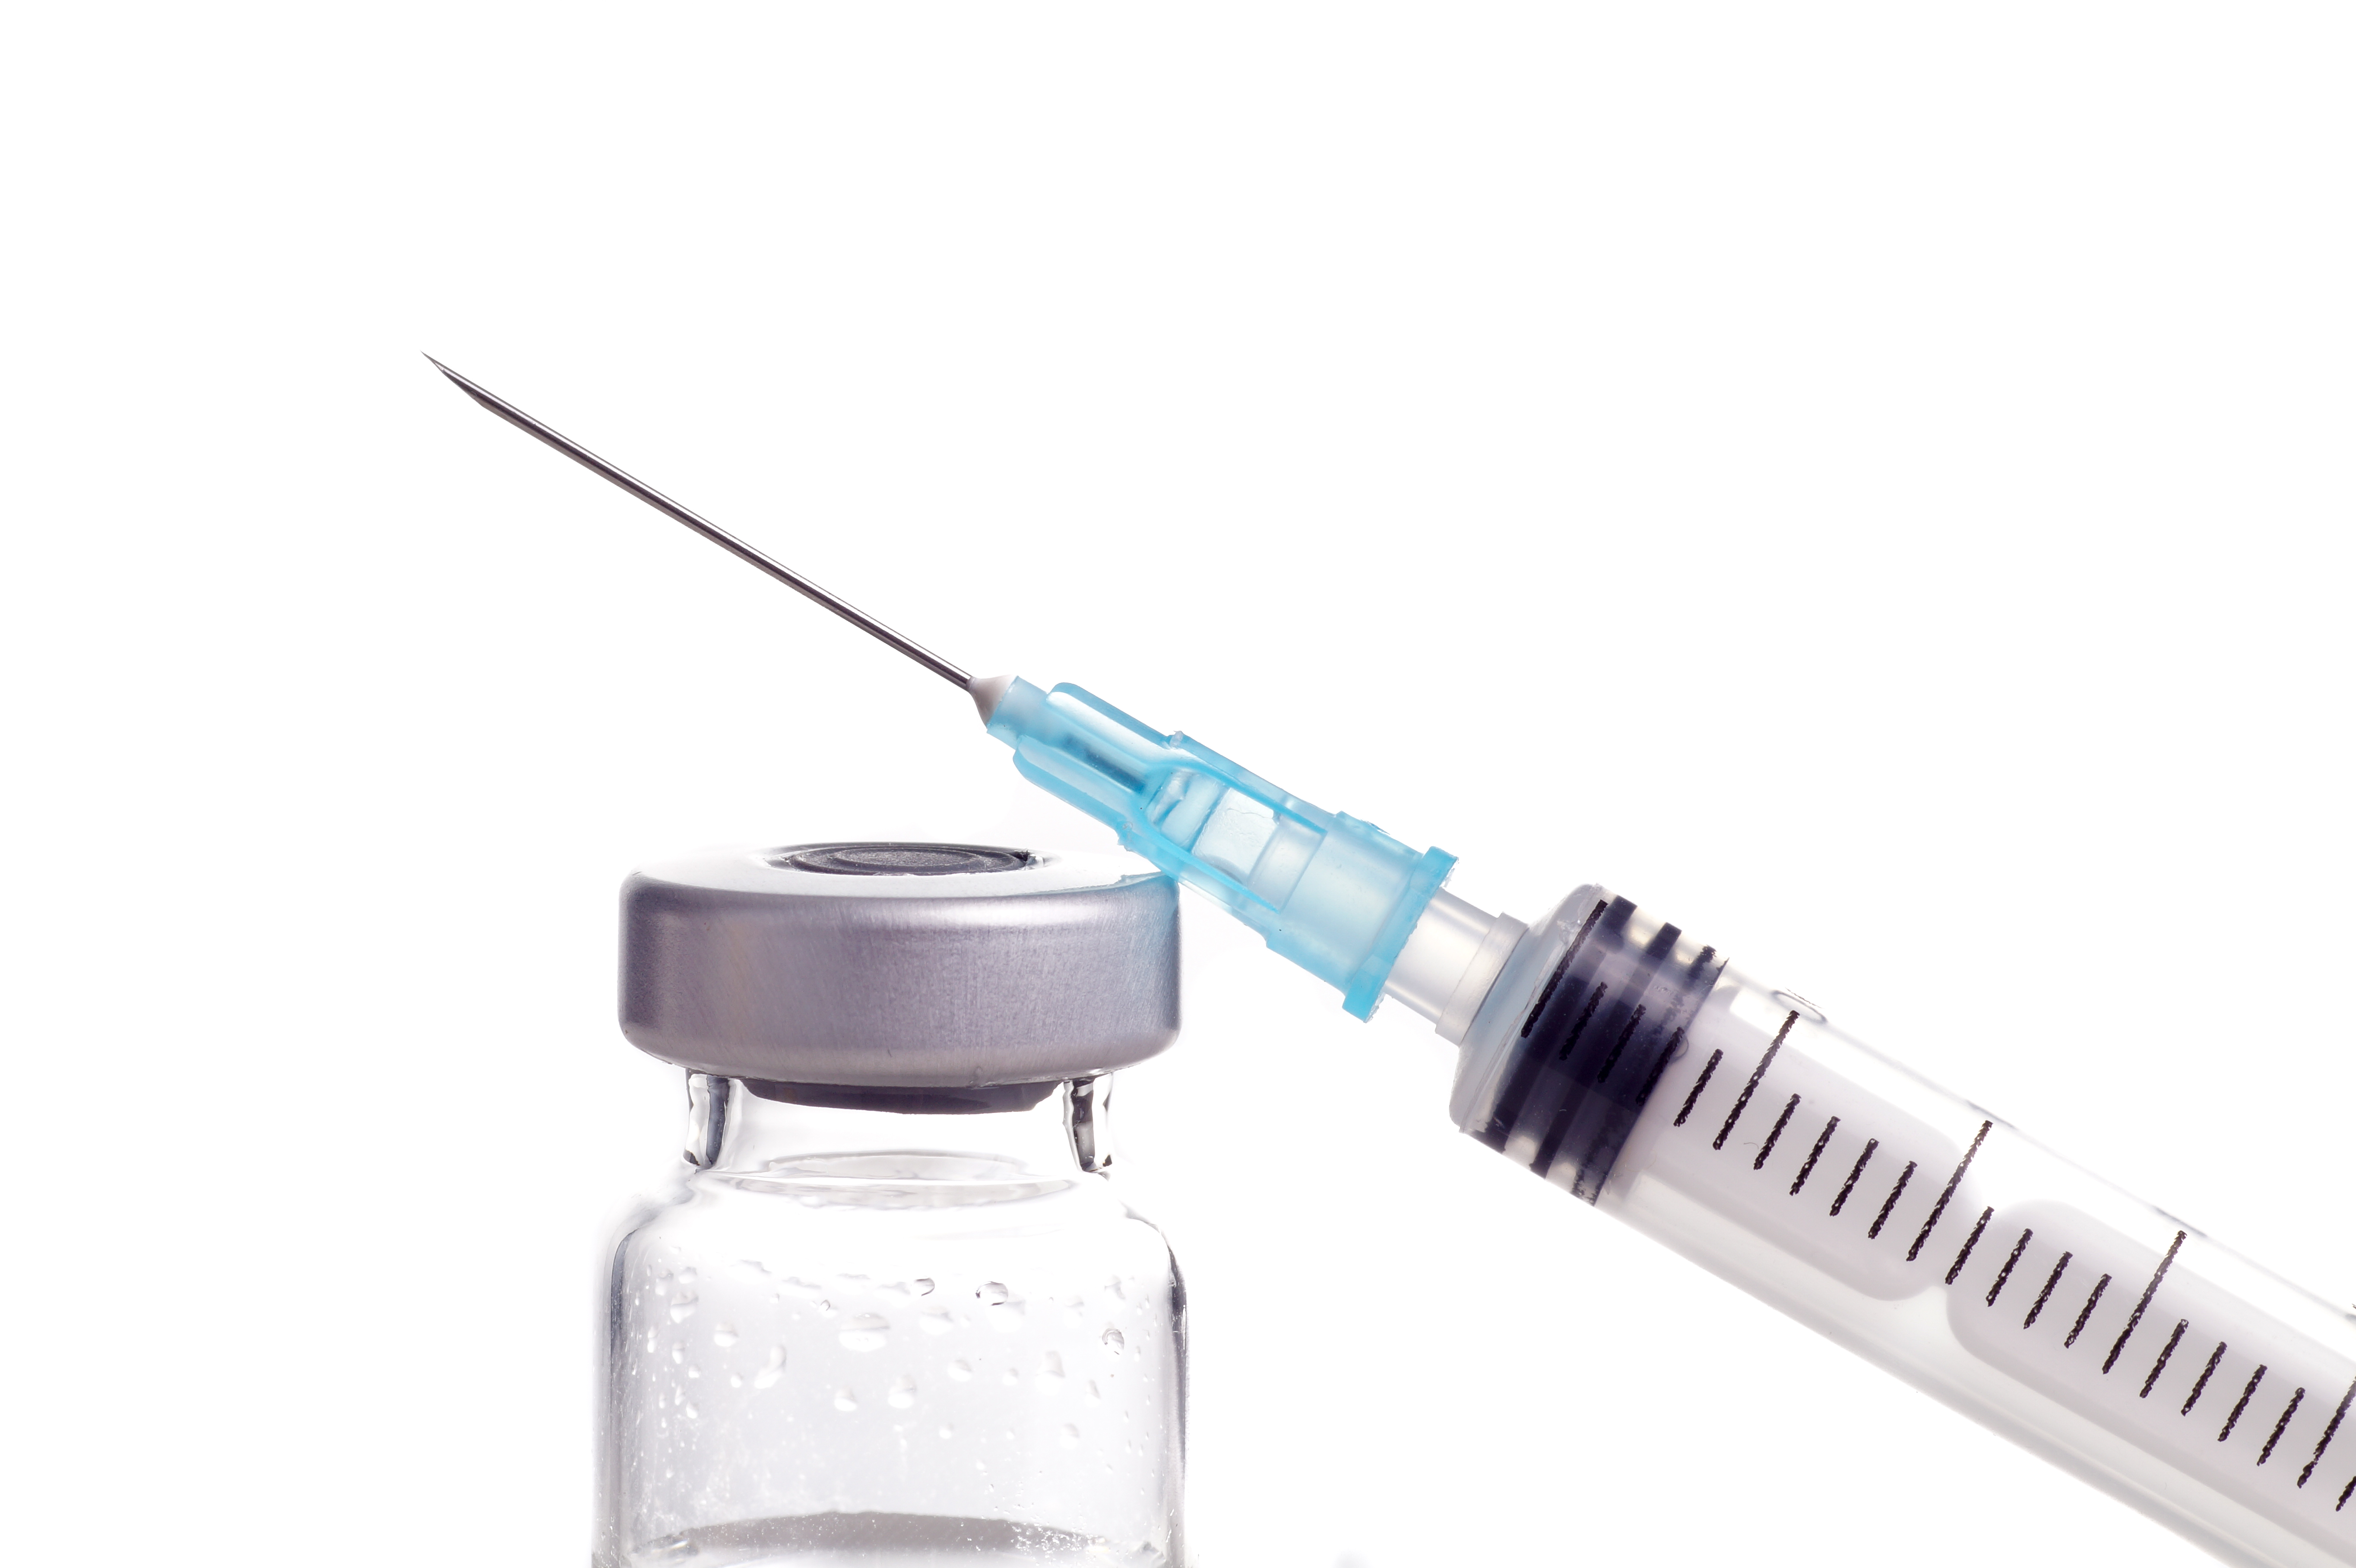 Needle for vaccination